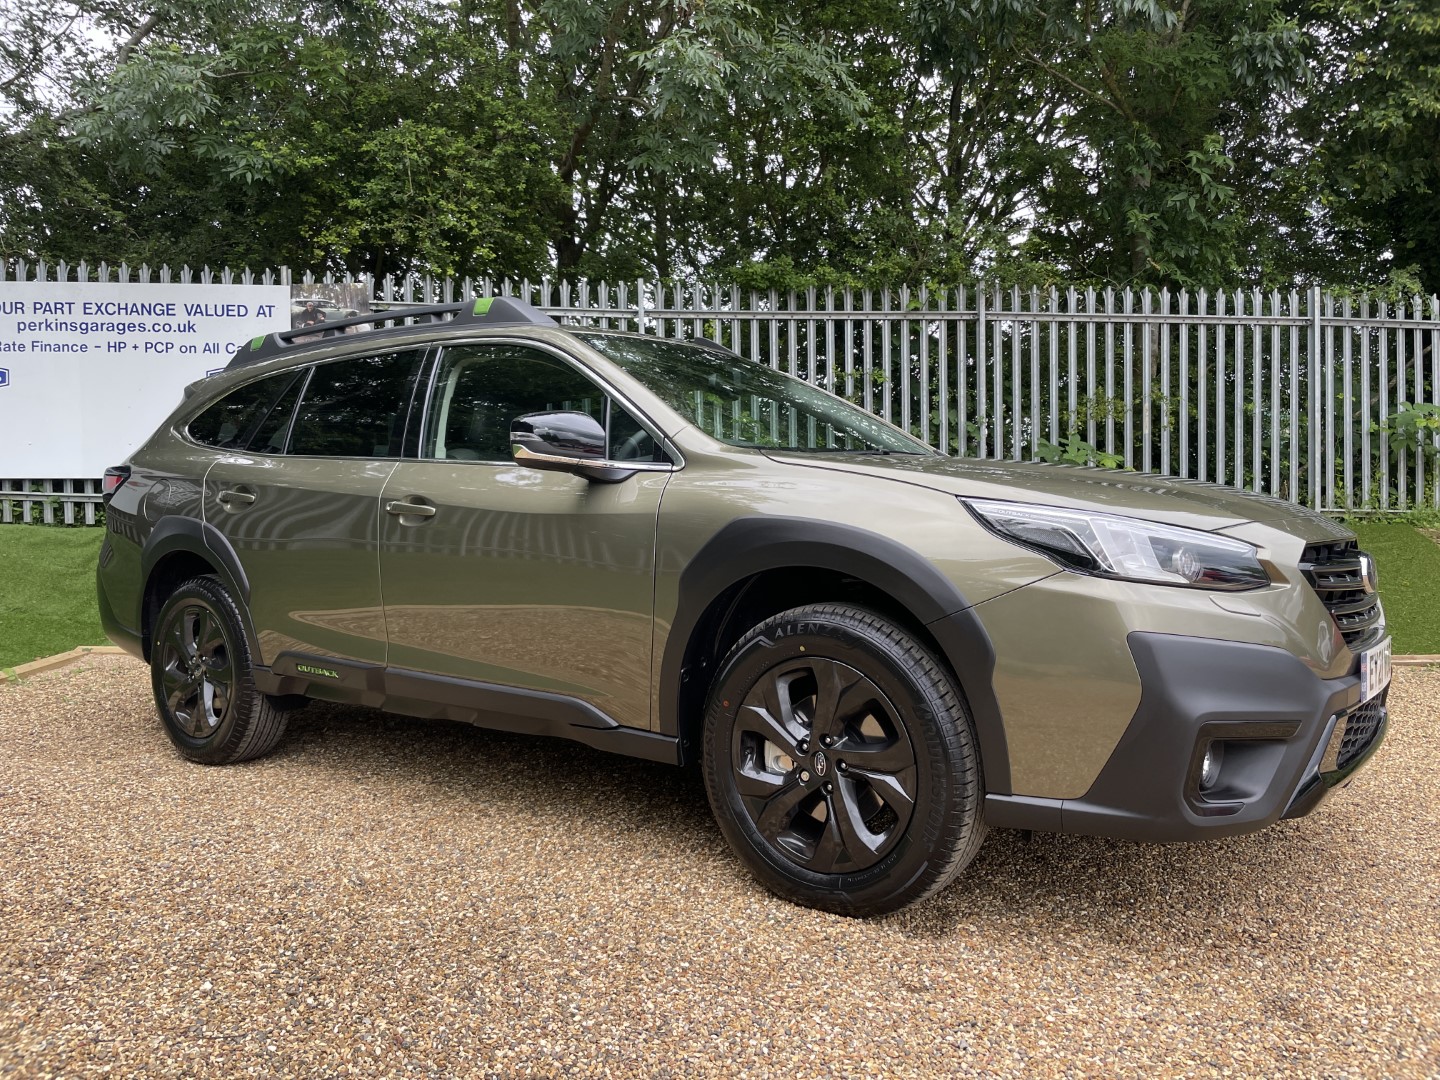 New Subaru Outback for sale